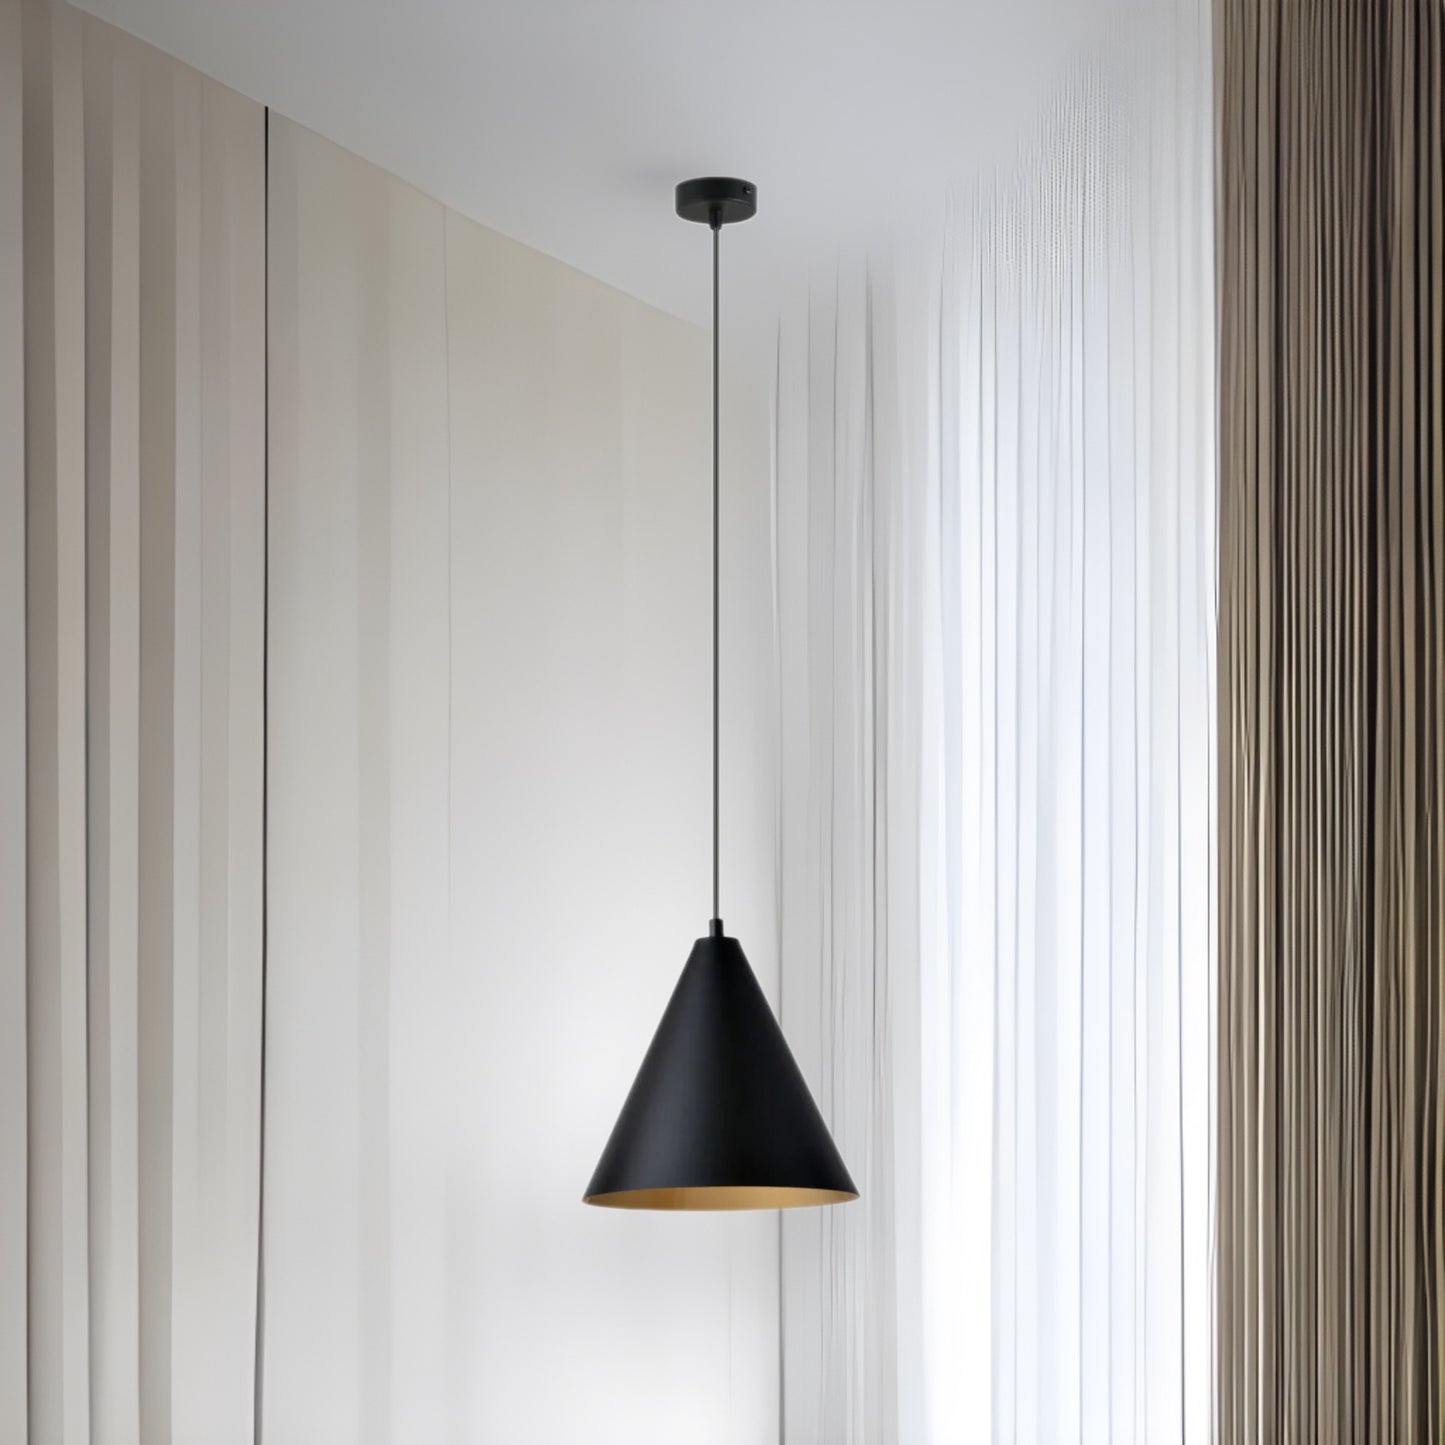 Introduce a note of industrial style into your interior with a hanging lamp from the REBEL series. The solid steel structure harmonizes with the black conical lampshade, whose golden interior adds unique character and the warmth of the diffused light. This combination of colors and materials makes the lamp fit perfectly into modern, austere spaces, adding expressiveness to them.